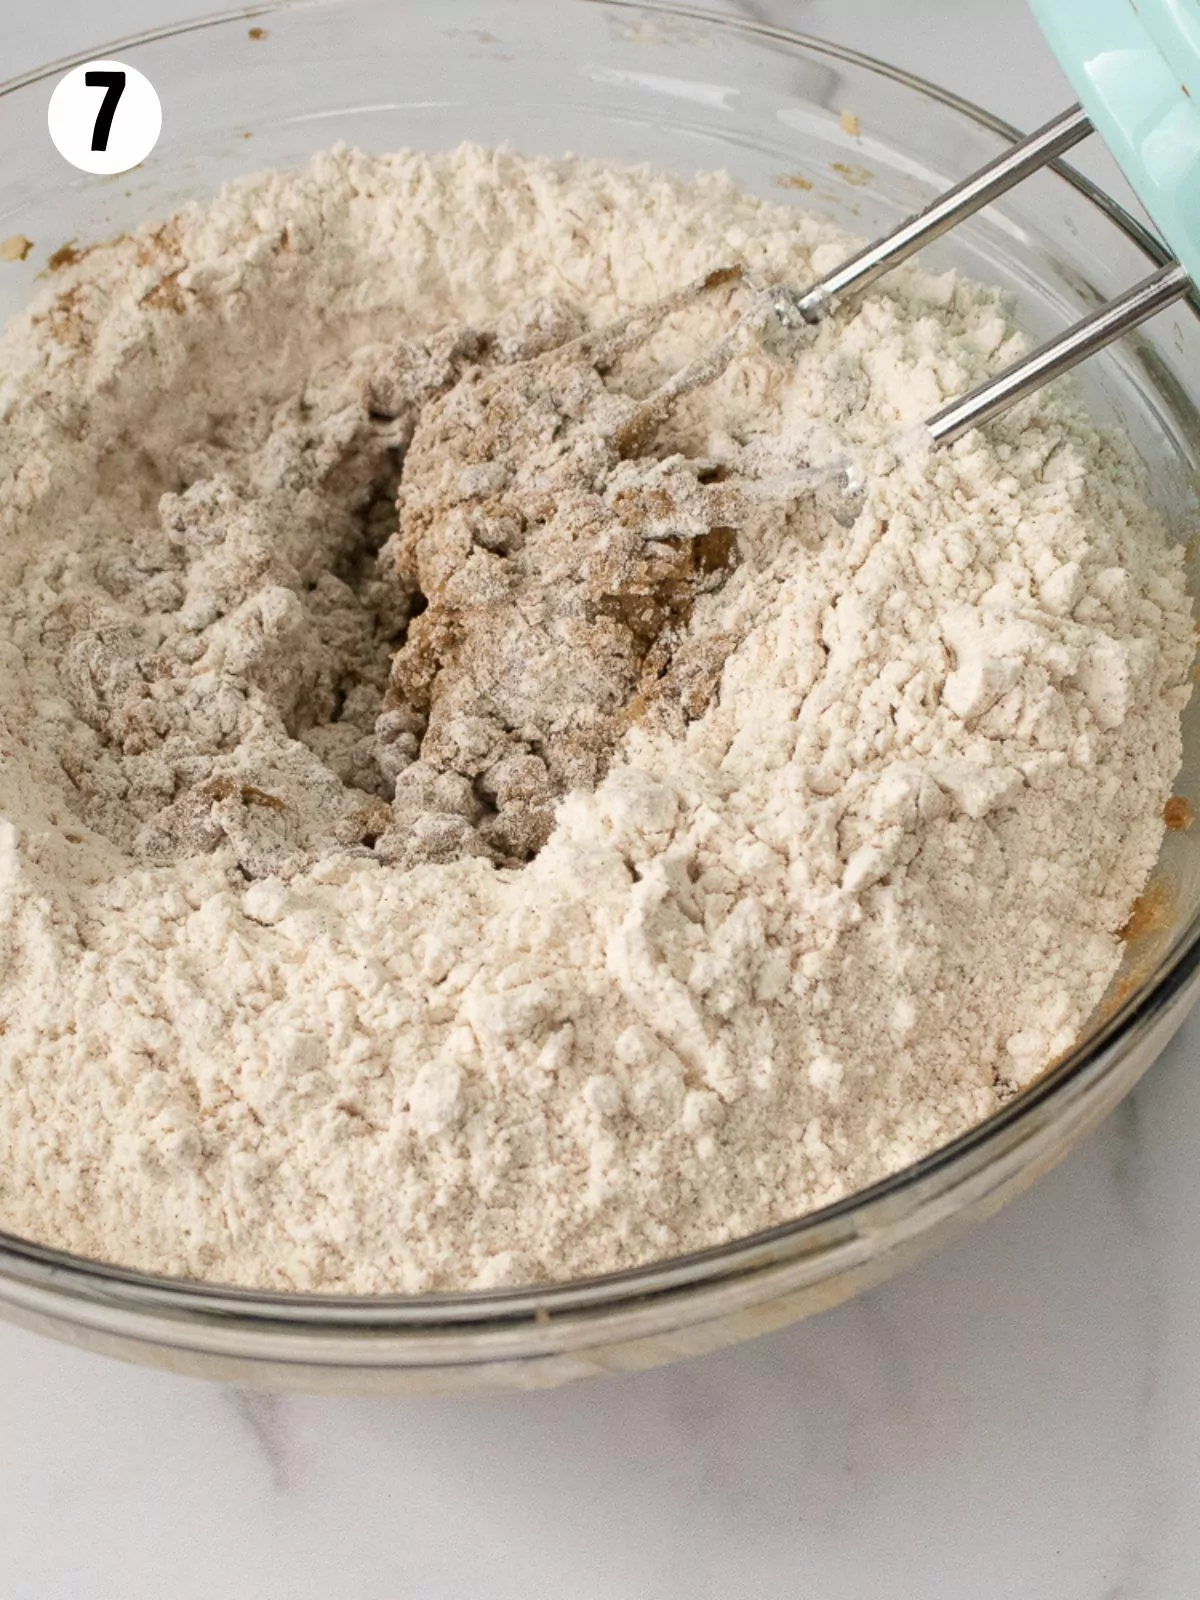 combine dry ingredients in bowl with wet ingredients.